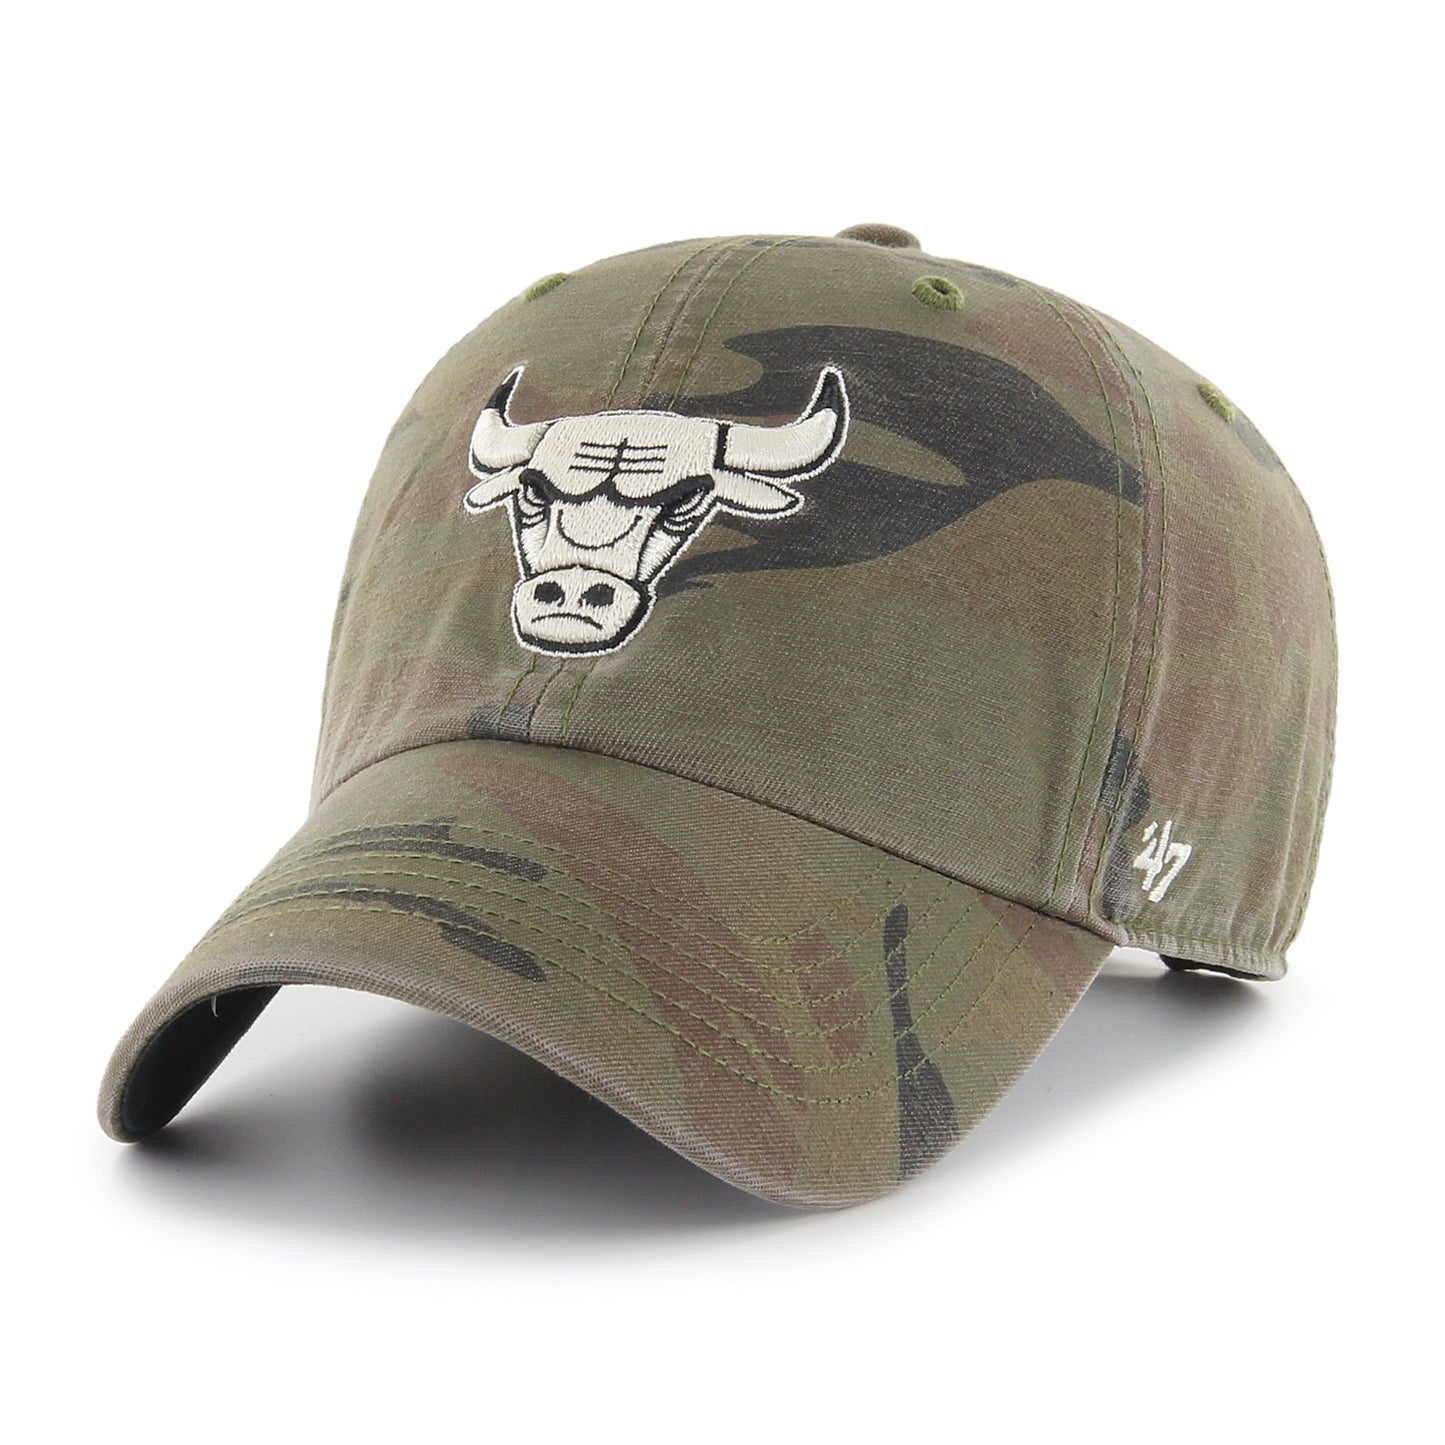 Chicago Bulls Camo Adjustable Clean Up Hat by '47